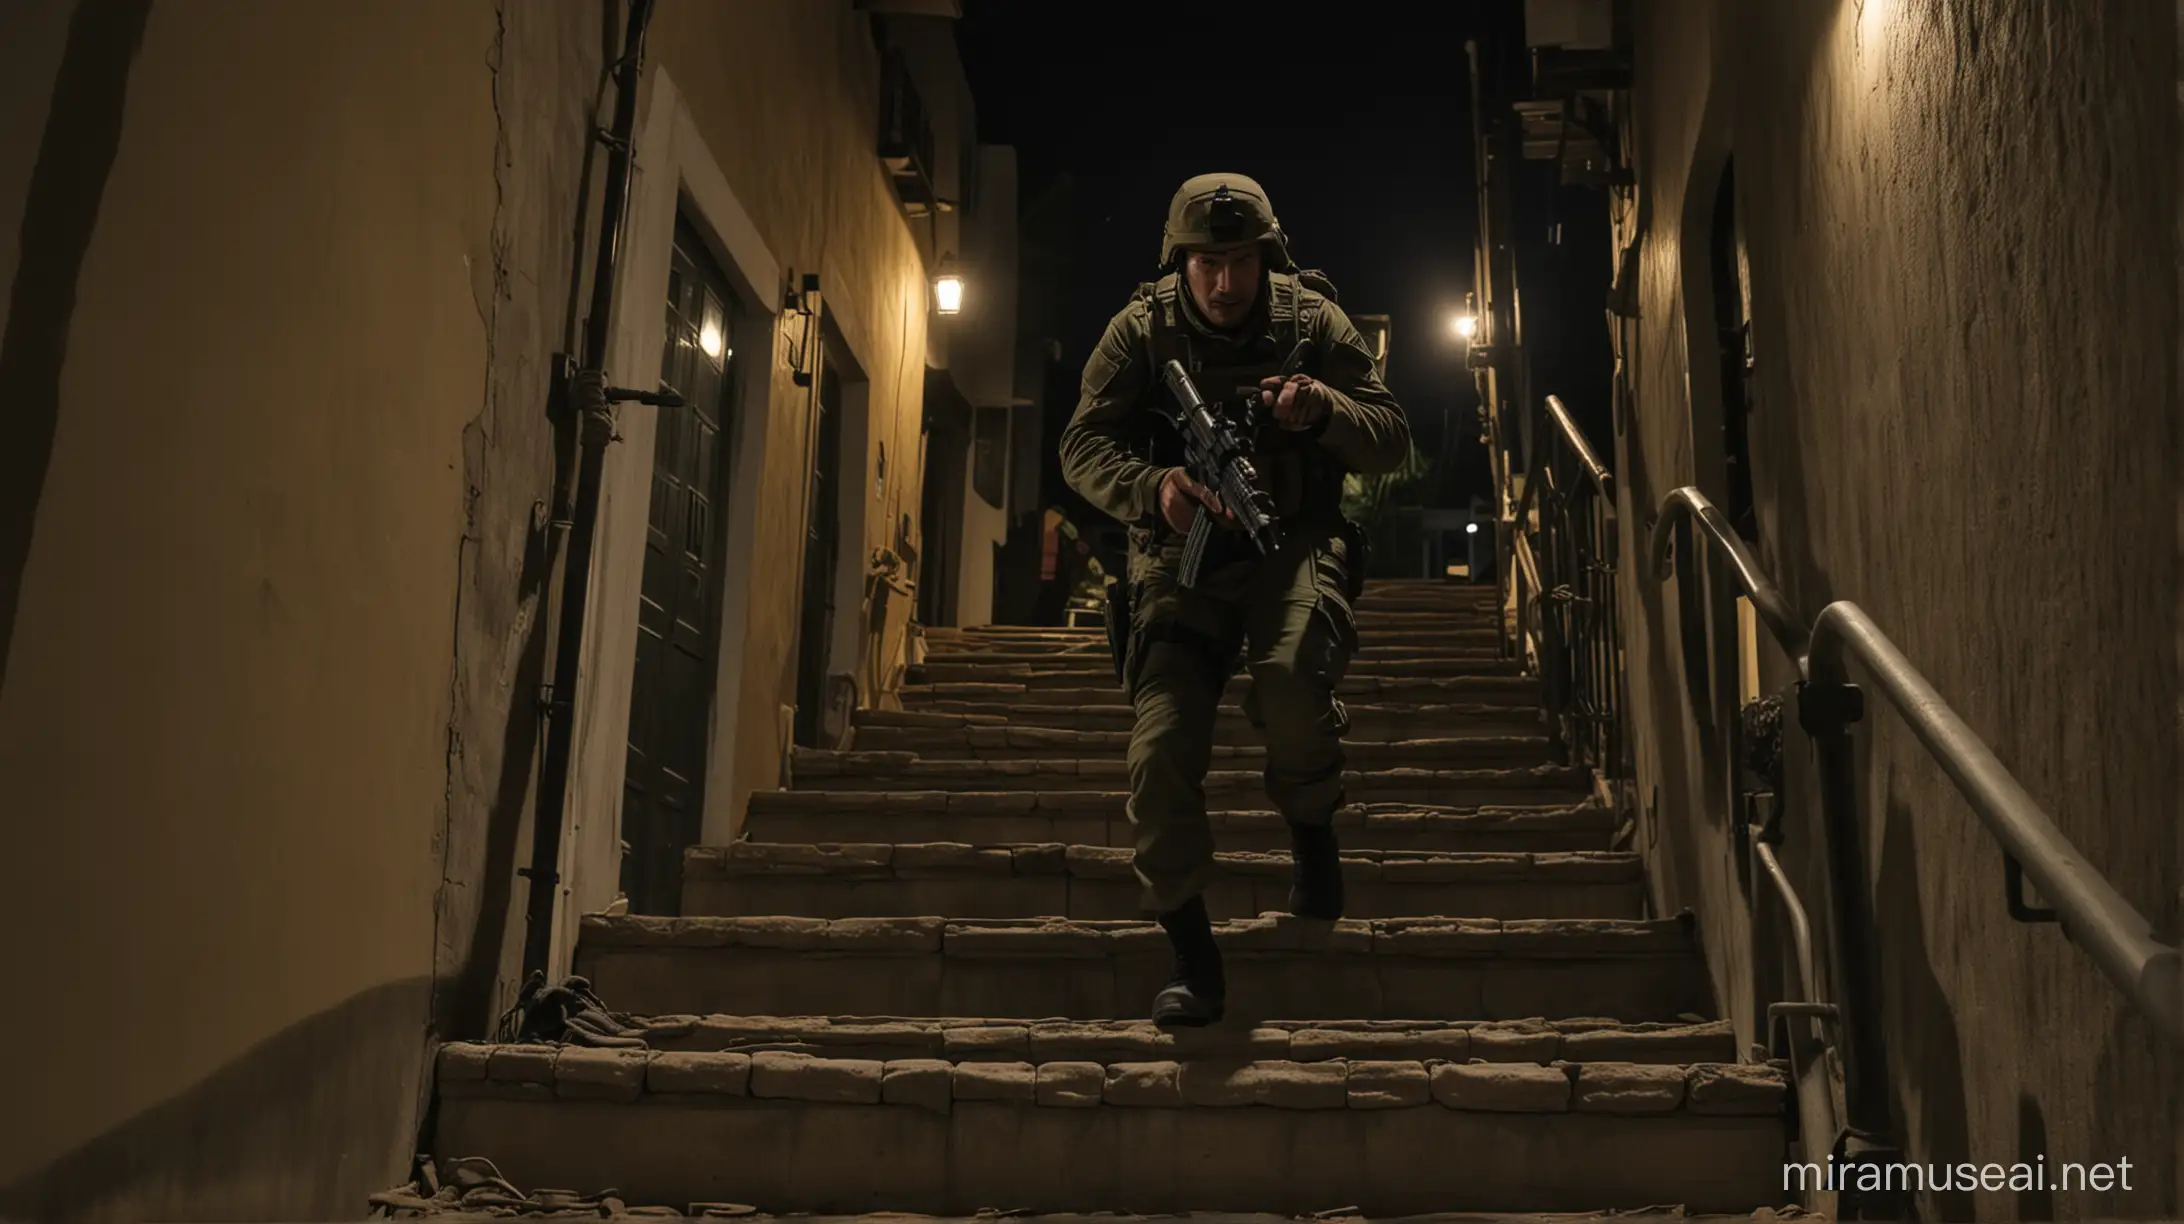 Nighttime Commando Unit Scaling House Stairs